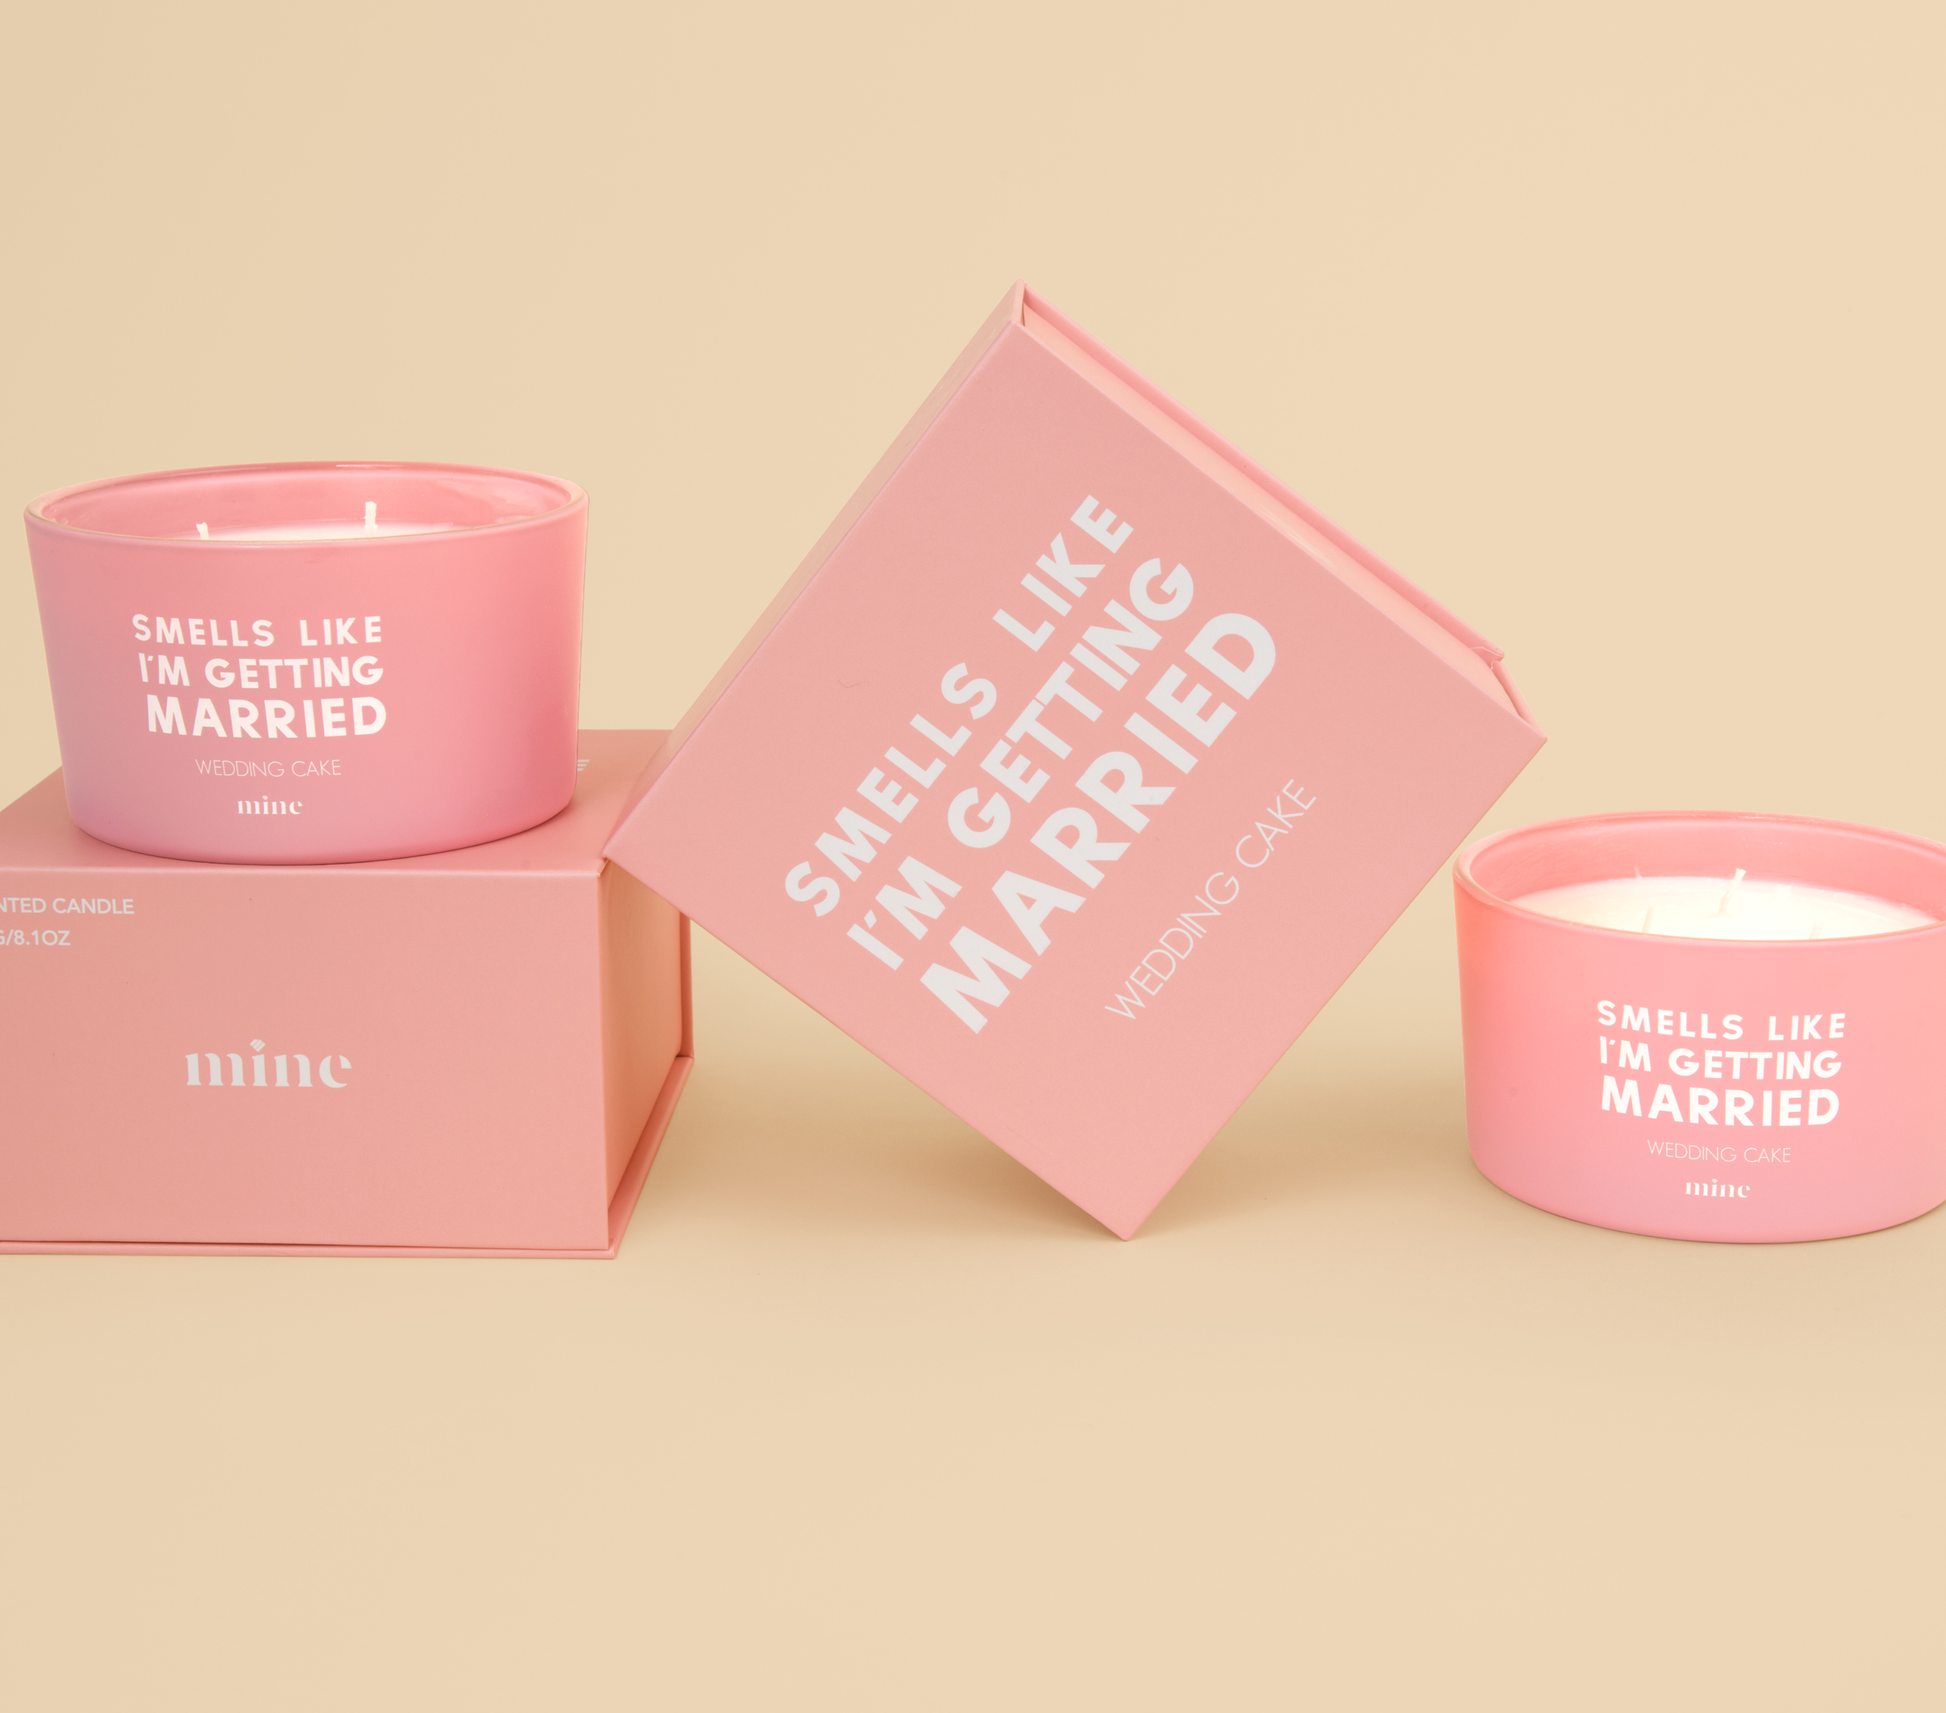 Wedding Cake Candle - The Mine Company - Smells Like I'm Getting Married - Pink Candle with Pink Gift Box